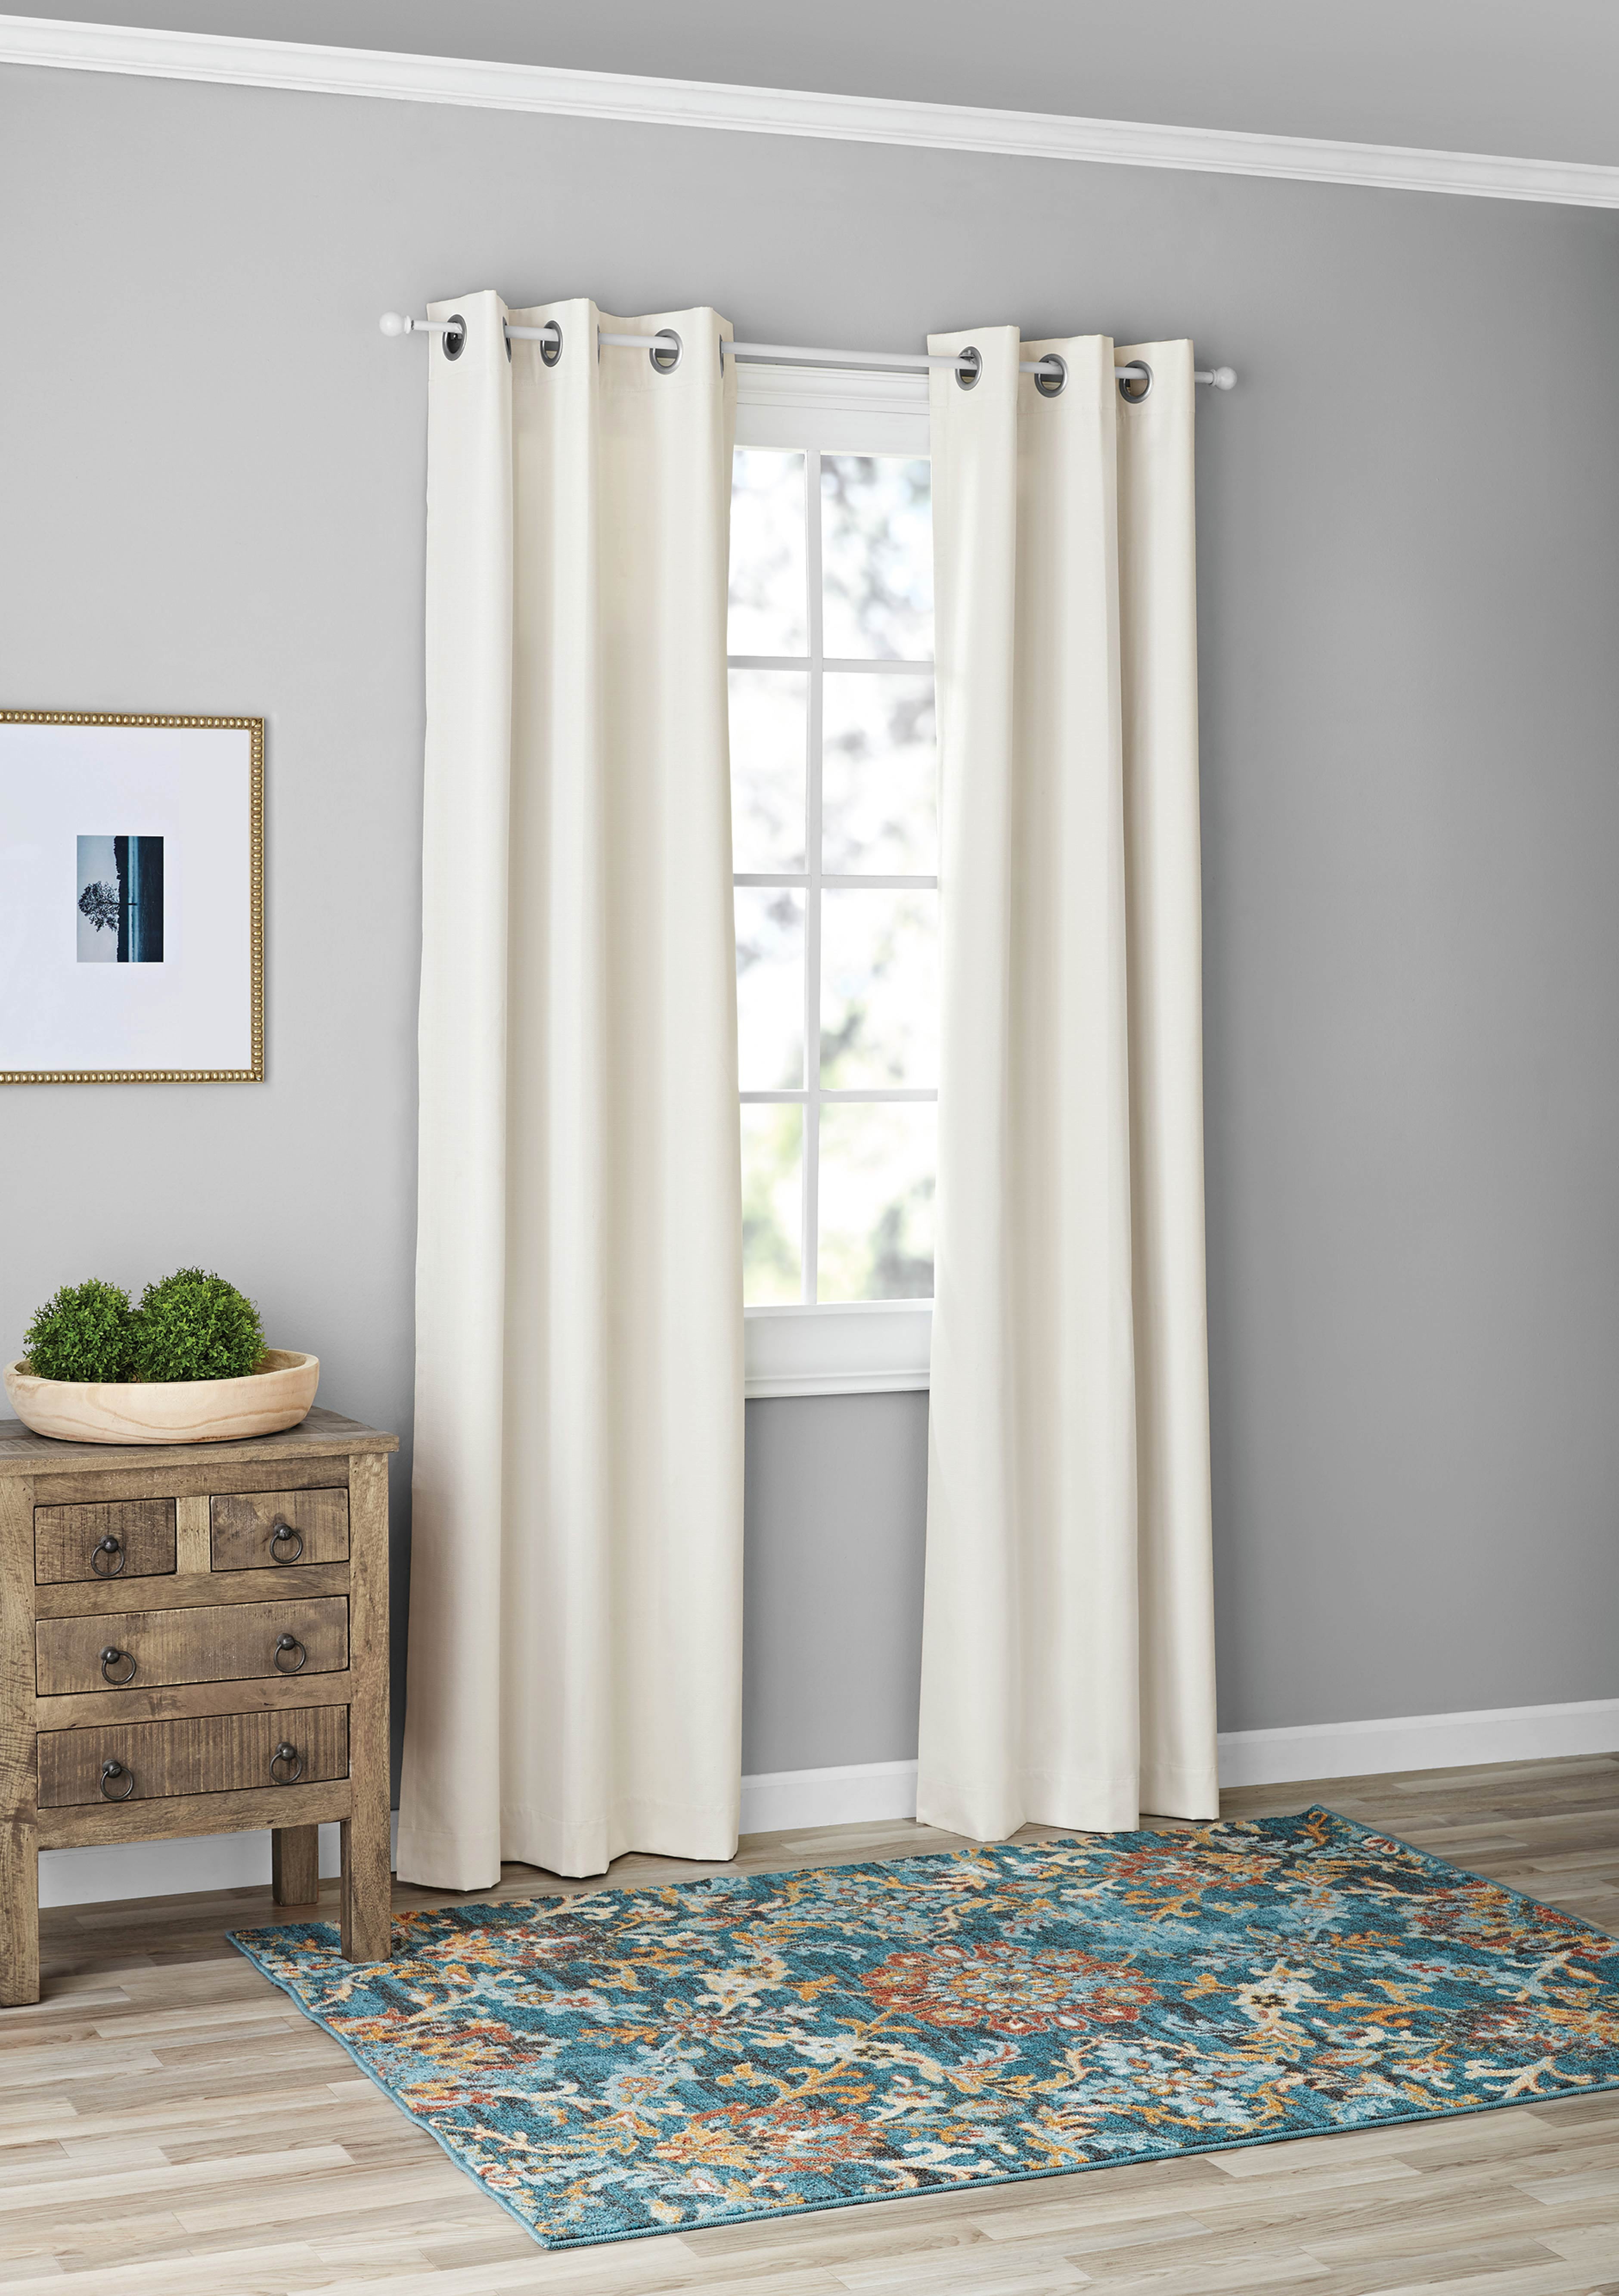 Mainstays Blackout Curtains, Set of 2, 37" x 84", White